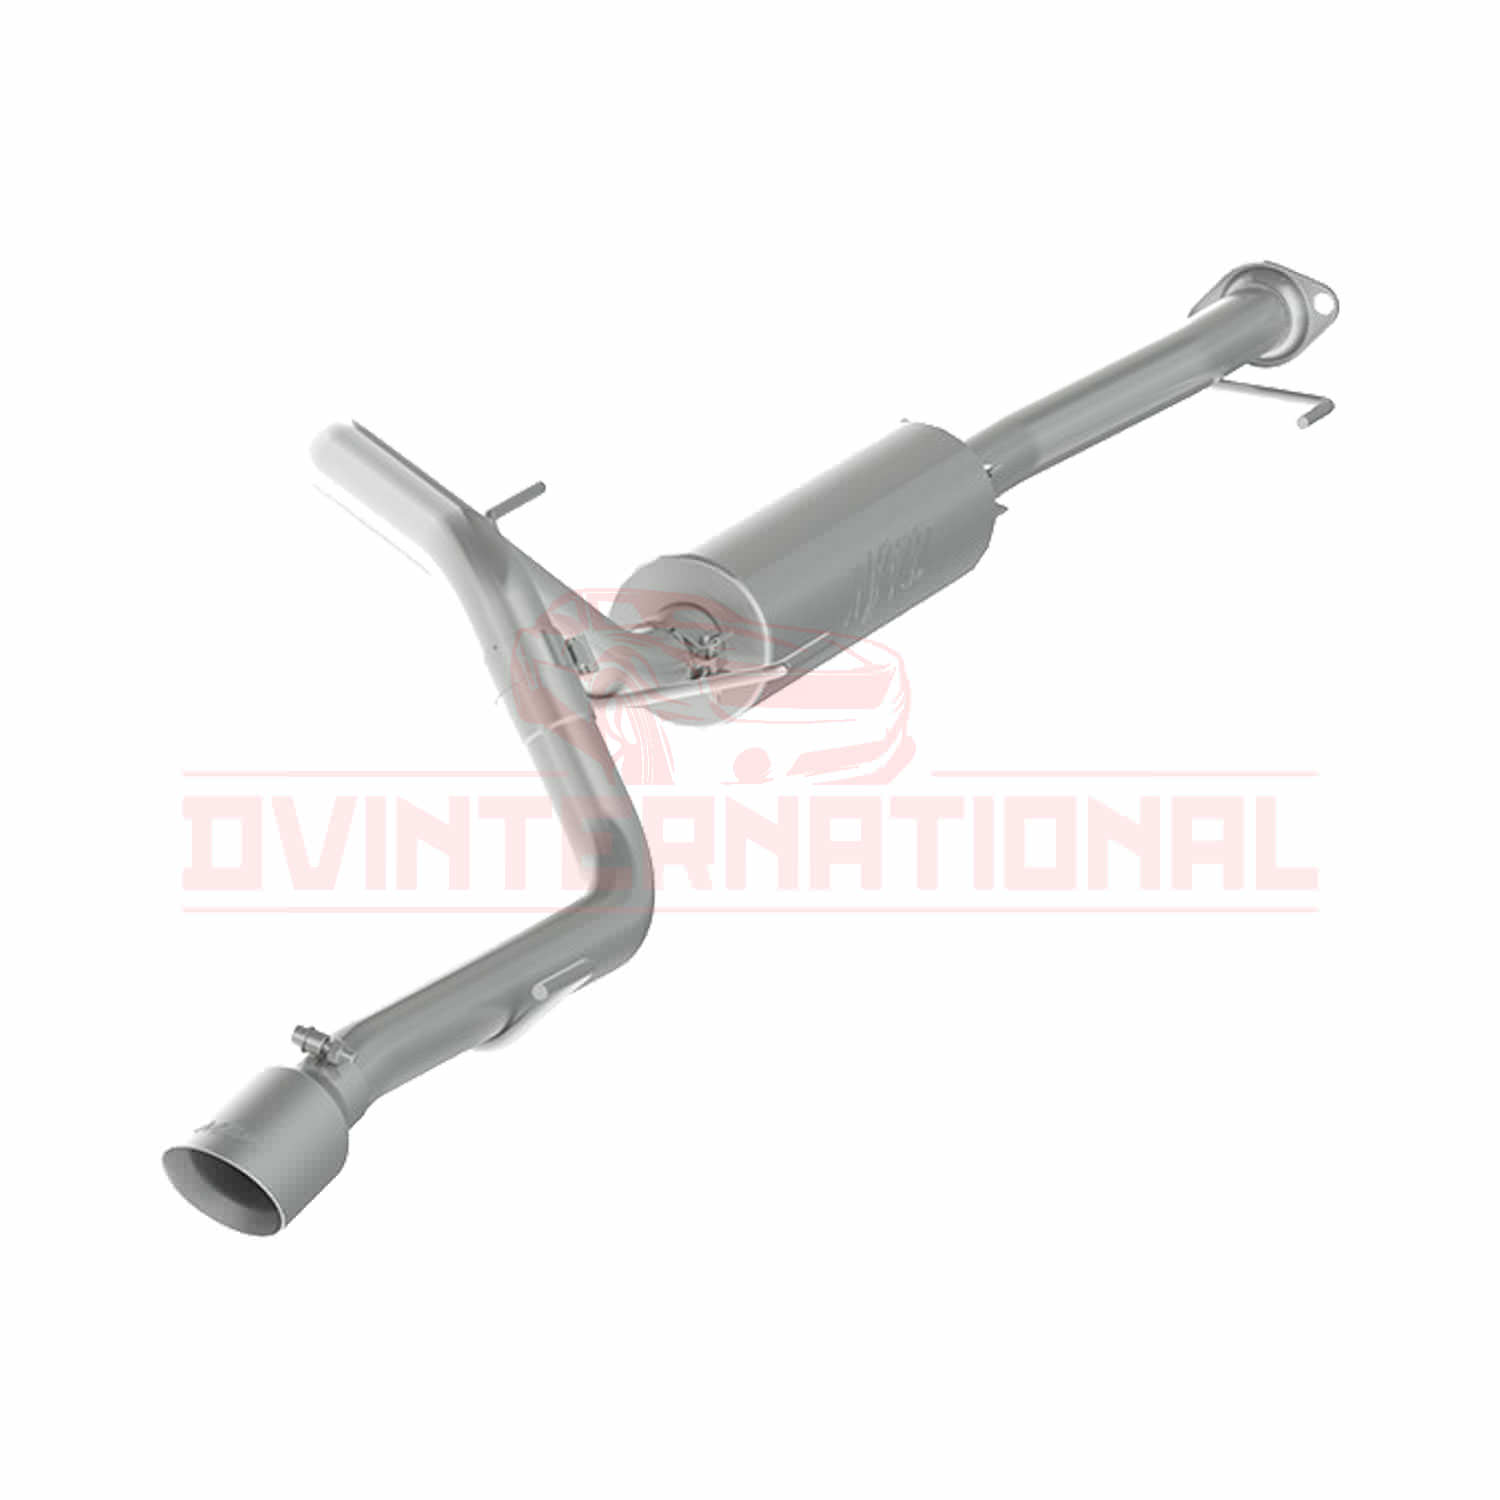 MBRP Exhaust System fits TOYOTA 4-RUNNER 4.0L4 2010-UP | eBay